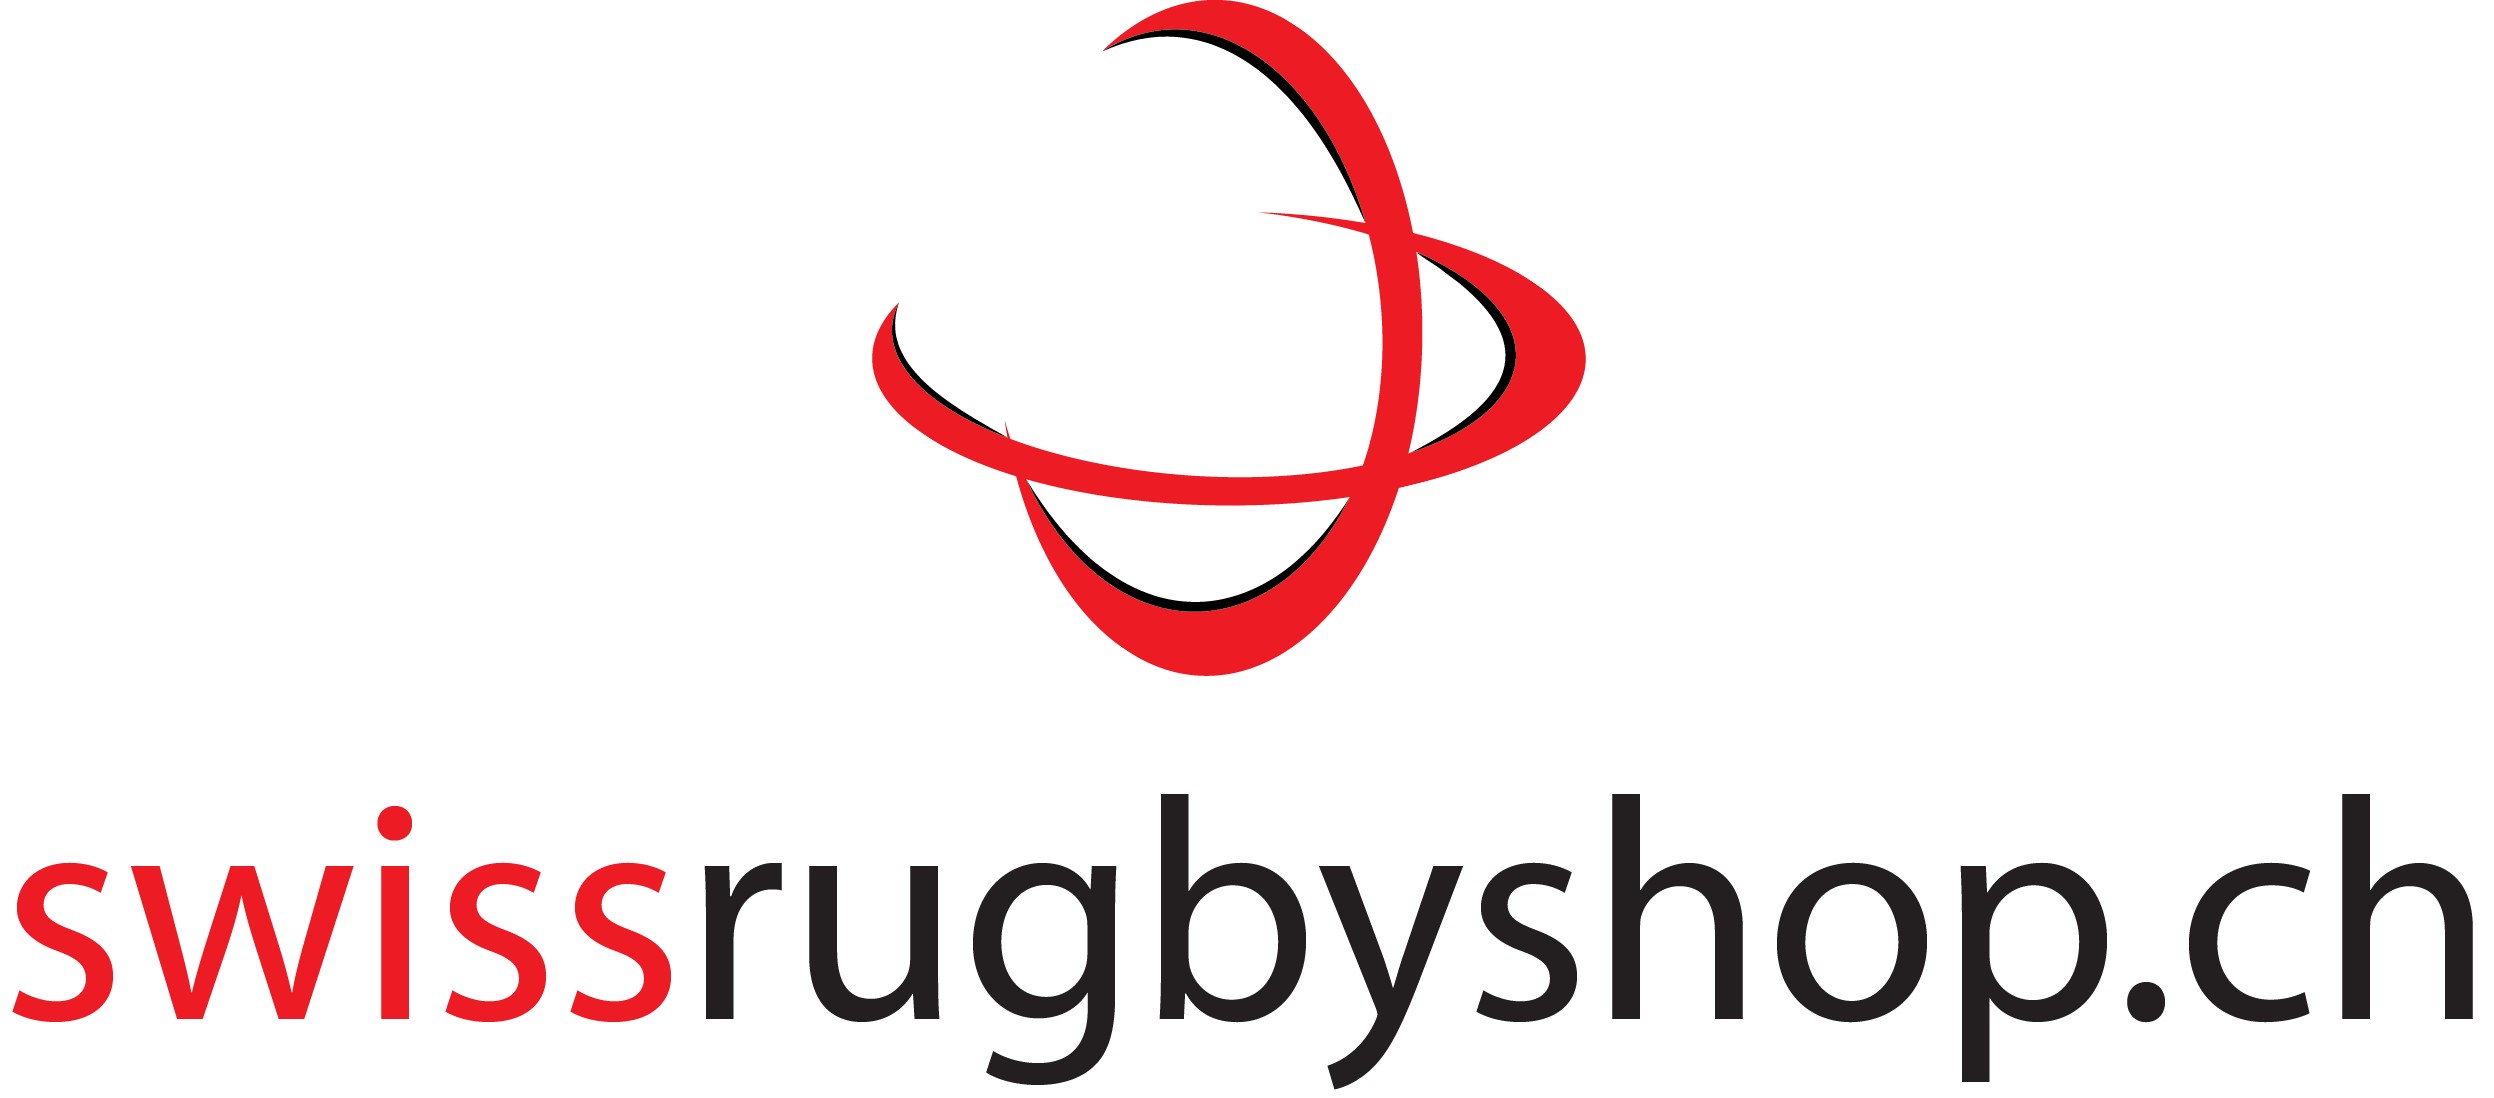 Swiss Rugby Shop